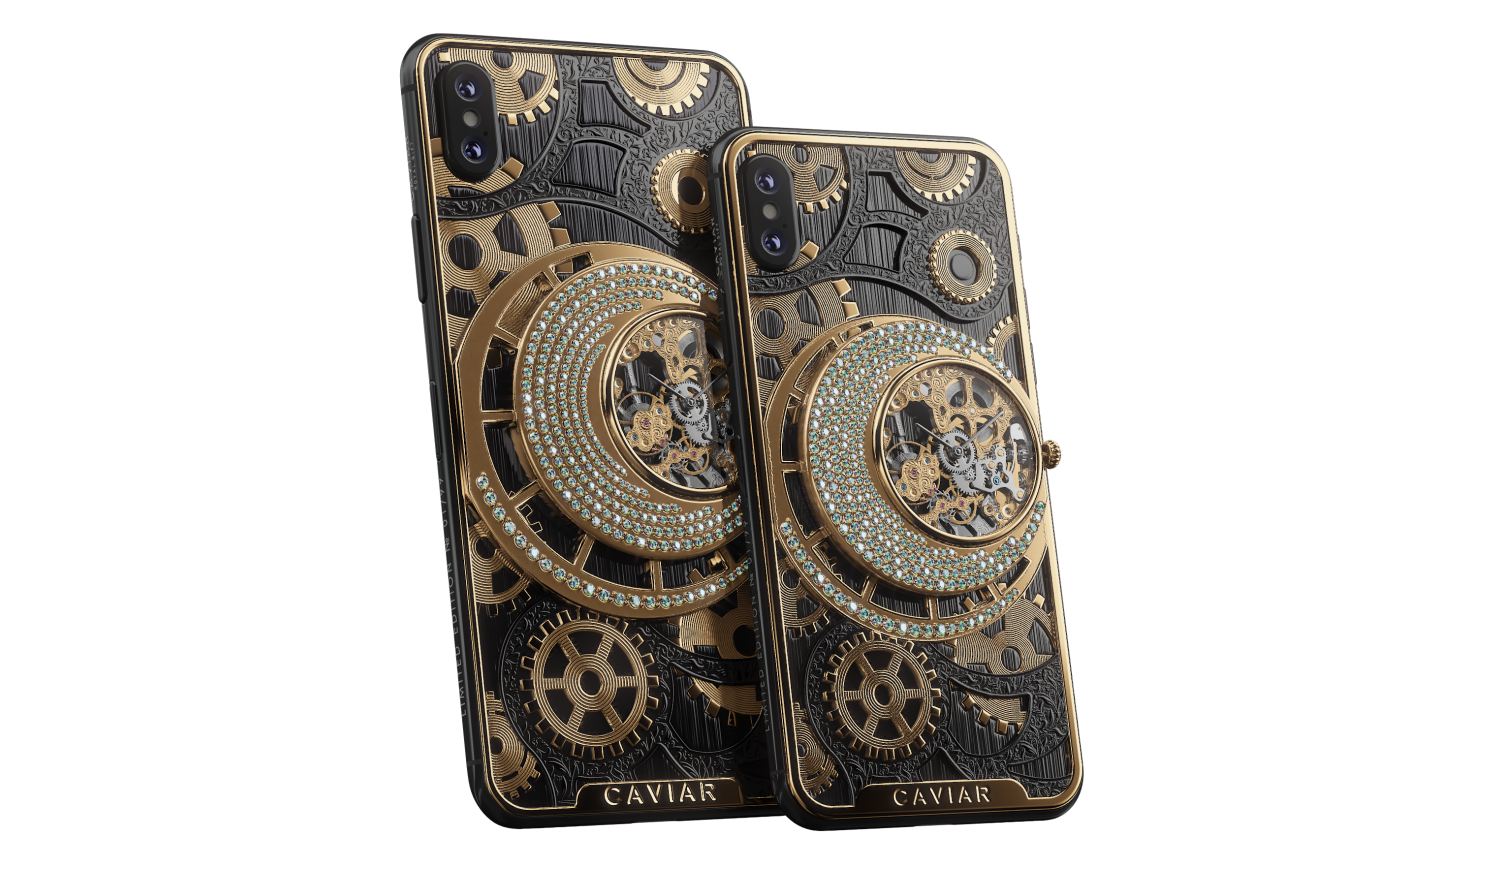 Gold plated phones or how to roll like an oligarch